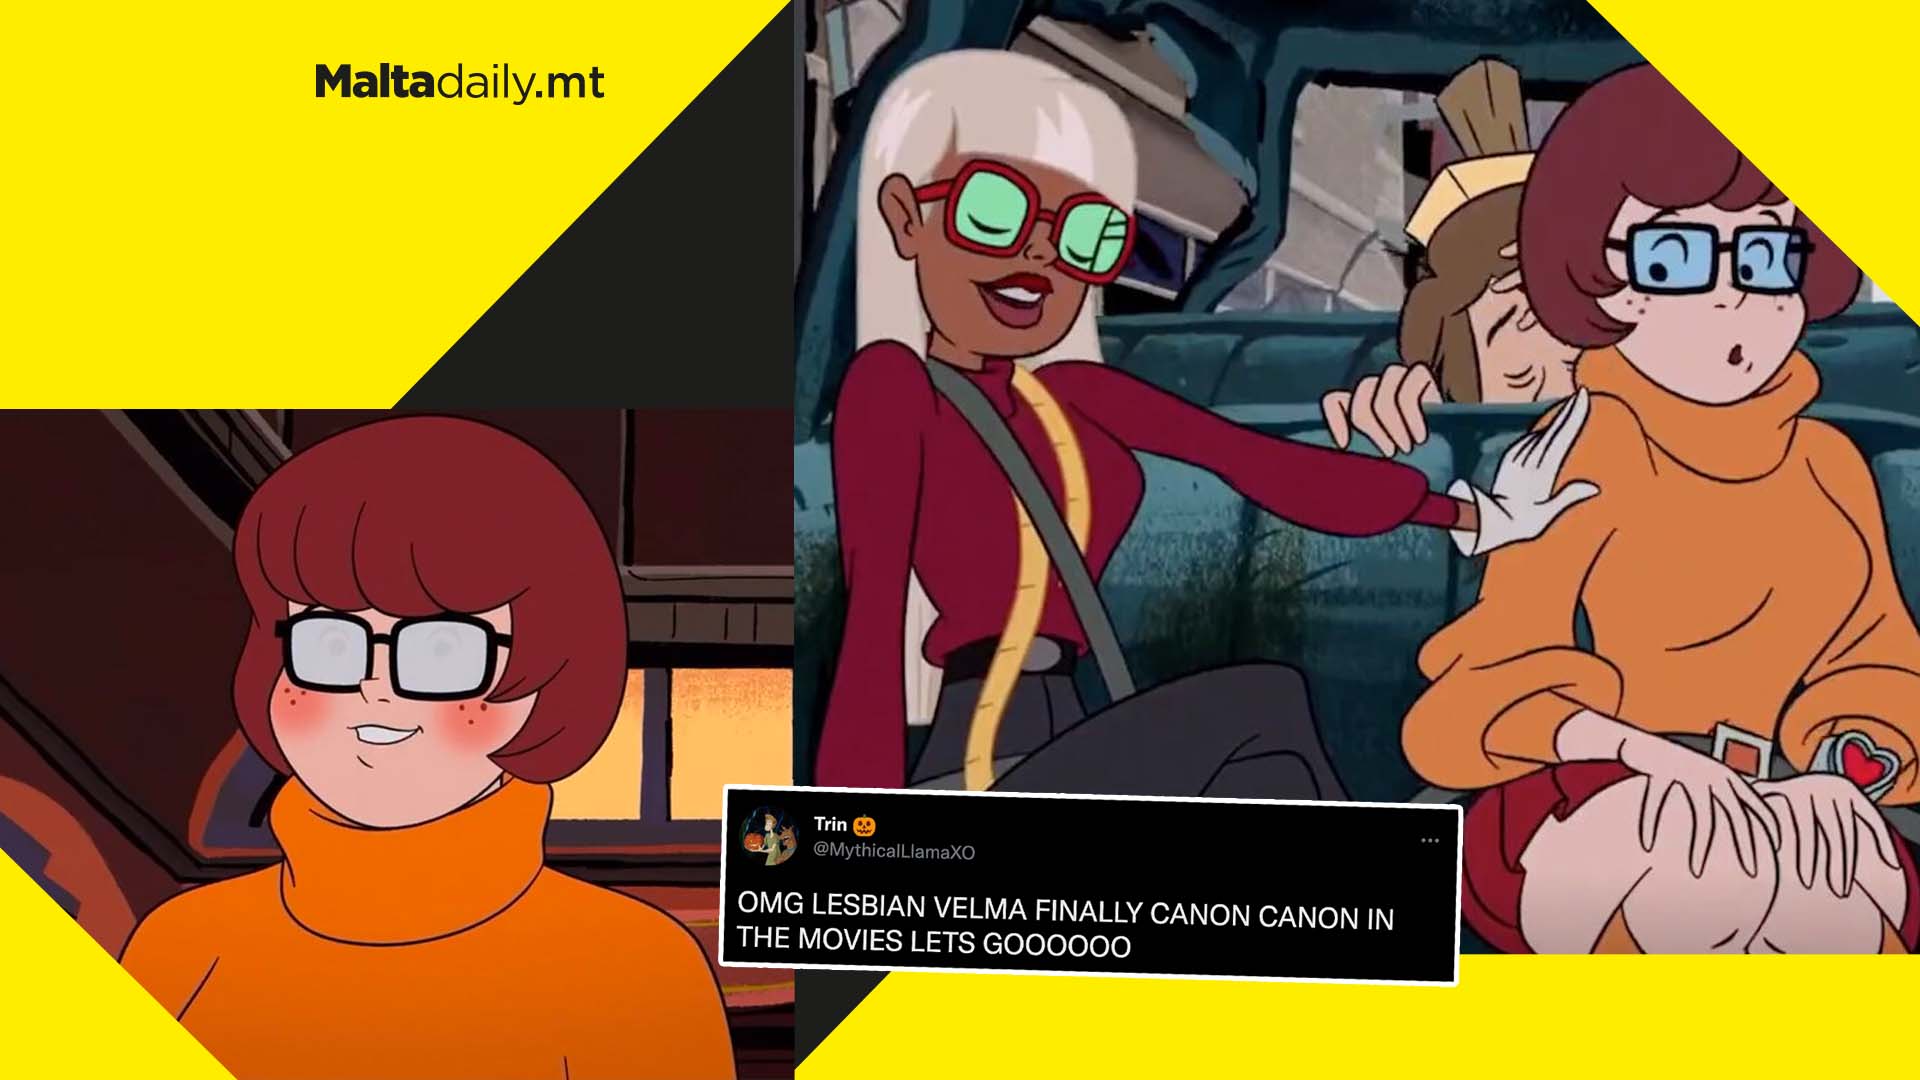 Scooby Doo's Velma comes out as lesbian in latest Scooby Doo trailer